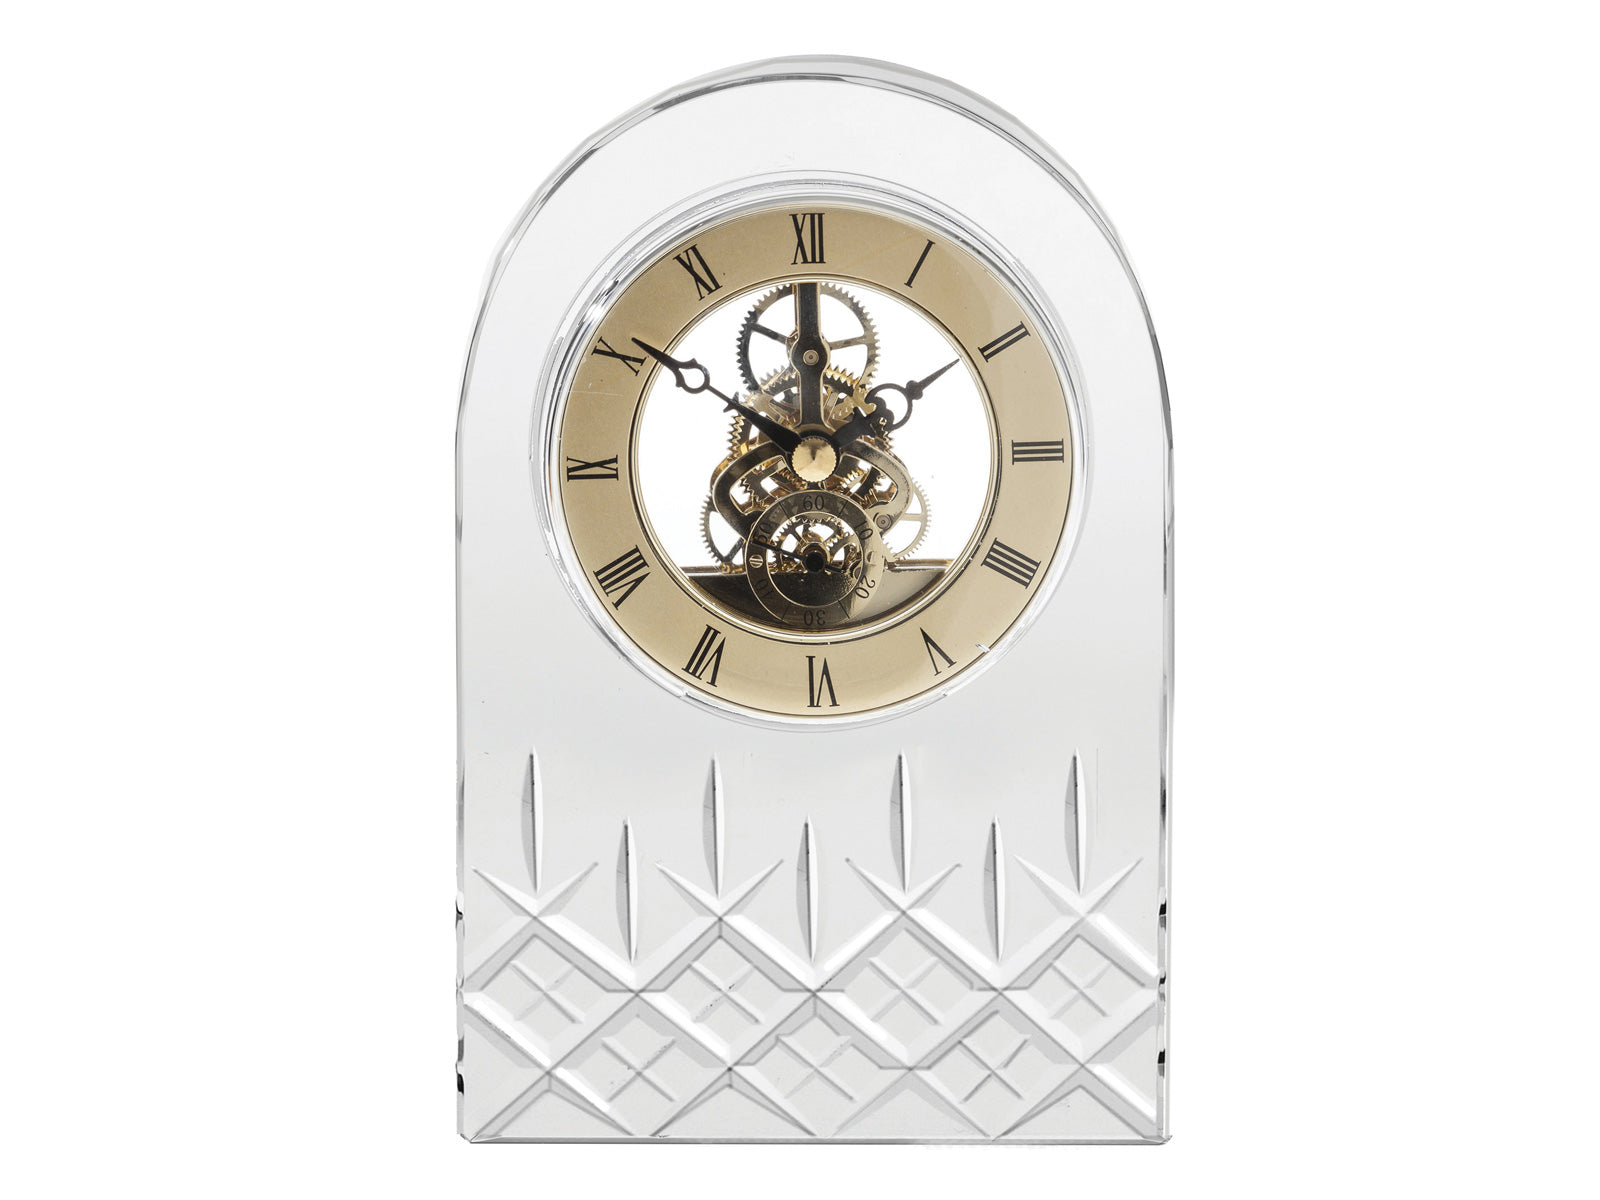 A large domed crystal clock with an exposed mechanism made of gold and black pieces. It has a london design cut into the back, which has a bed of diamonds with single flicks going up towards the clock face.